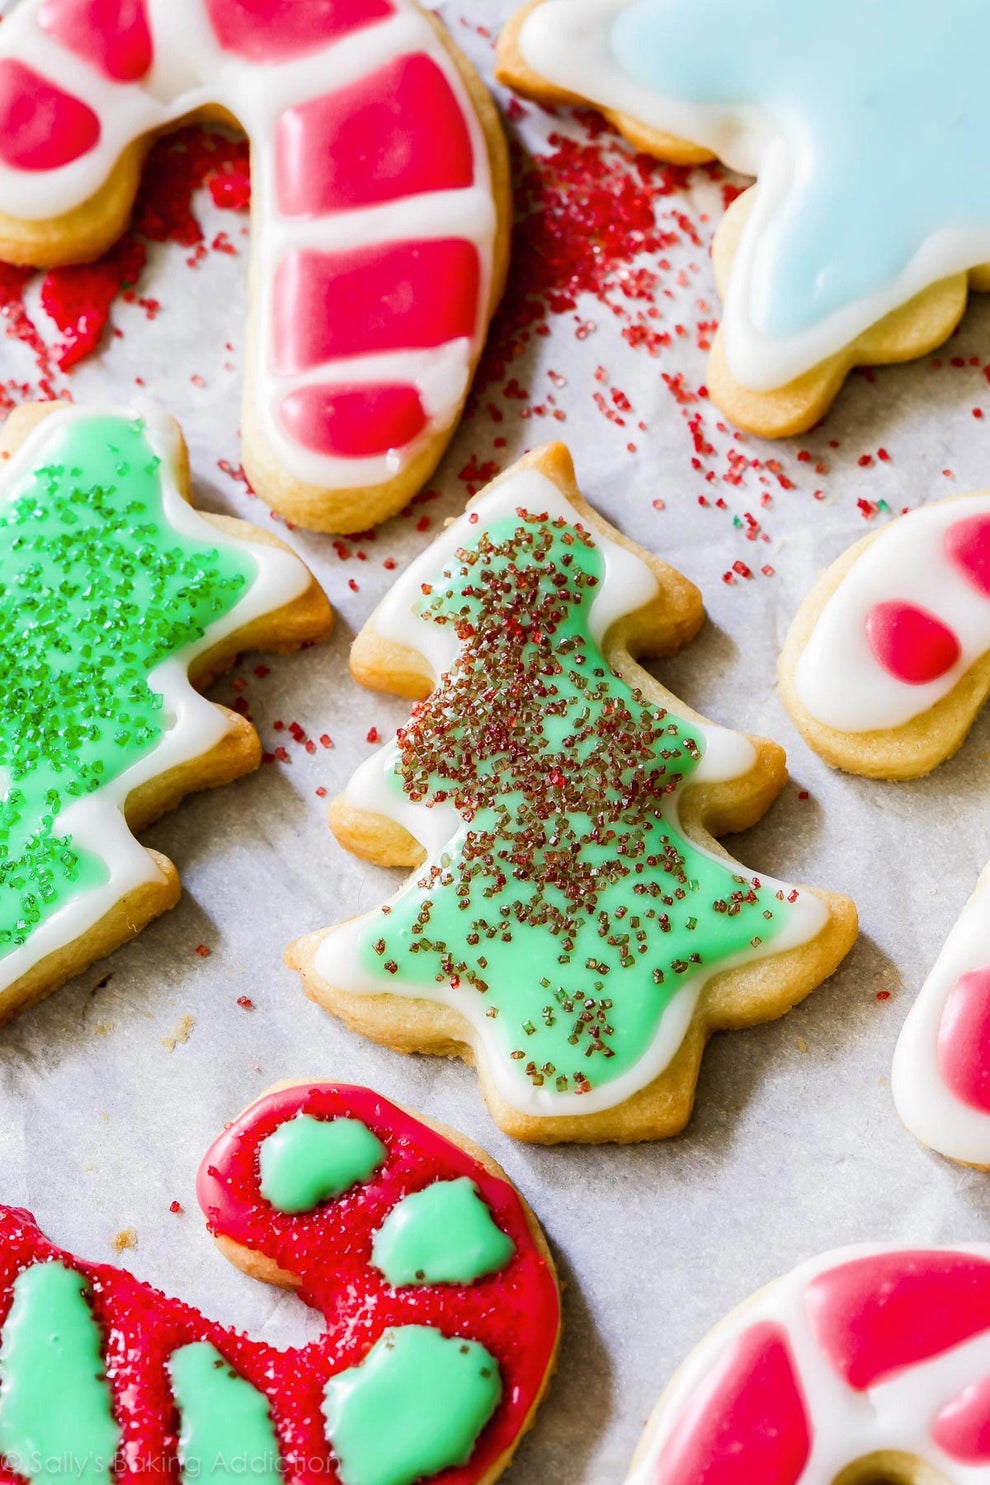 The Most Searched Christmas Cookies In All 50 States